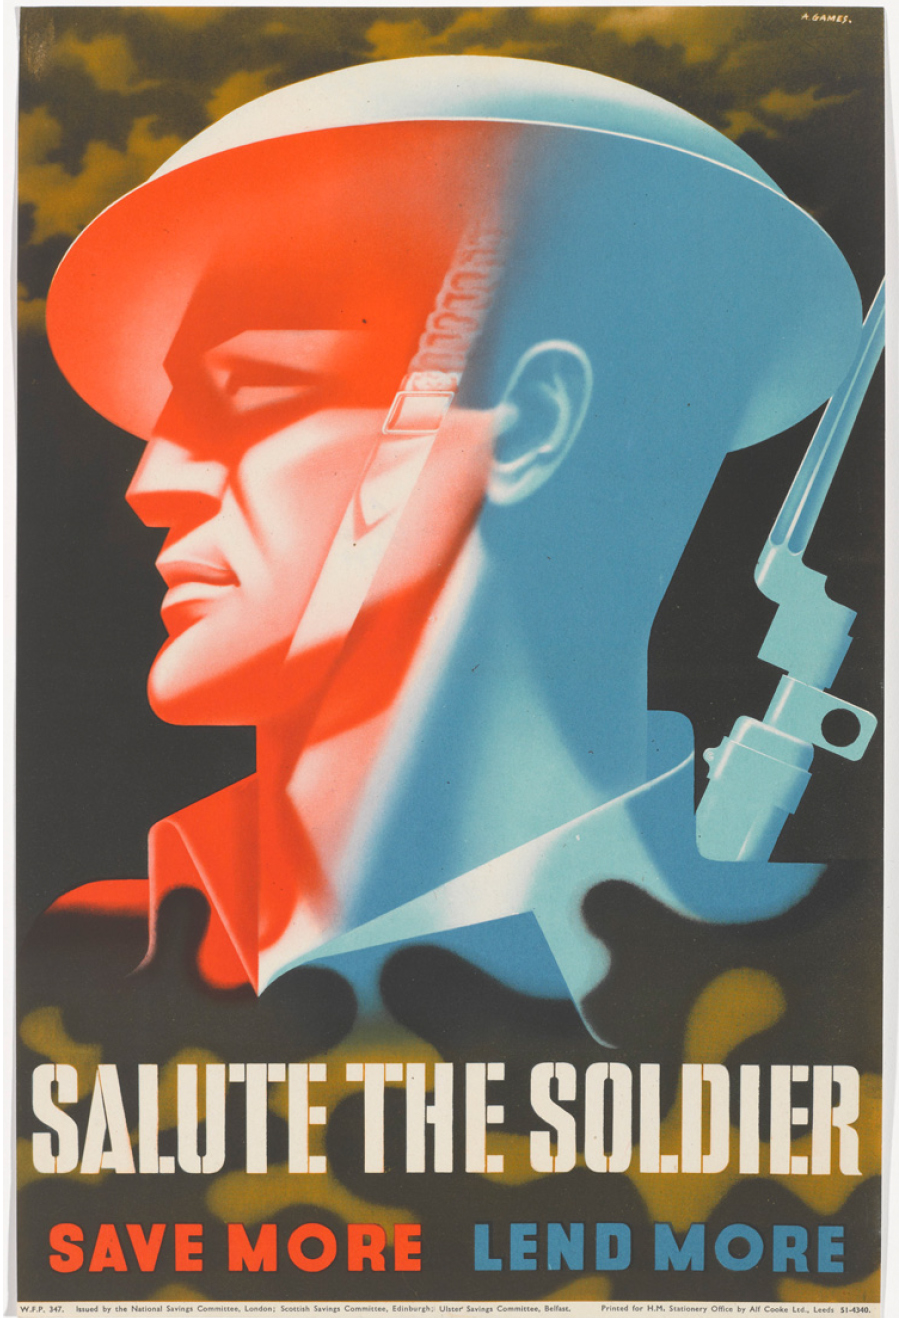 Salute the Soldier poster art by Abram Games.